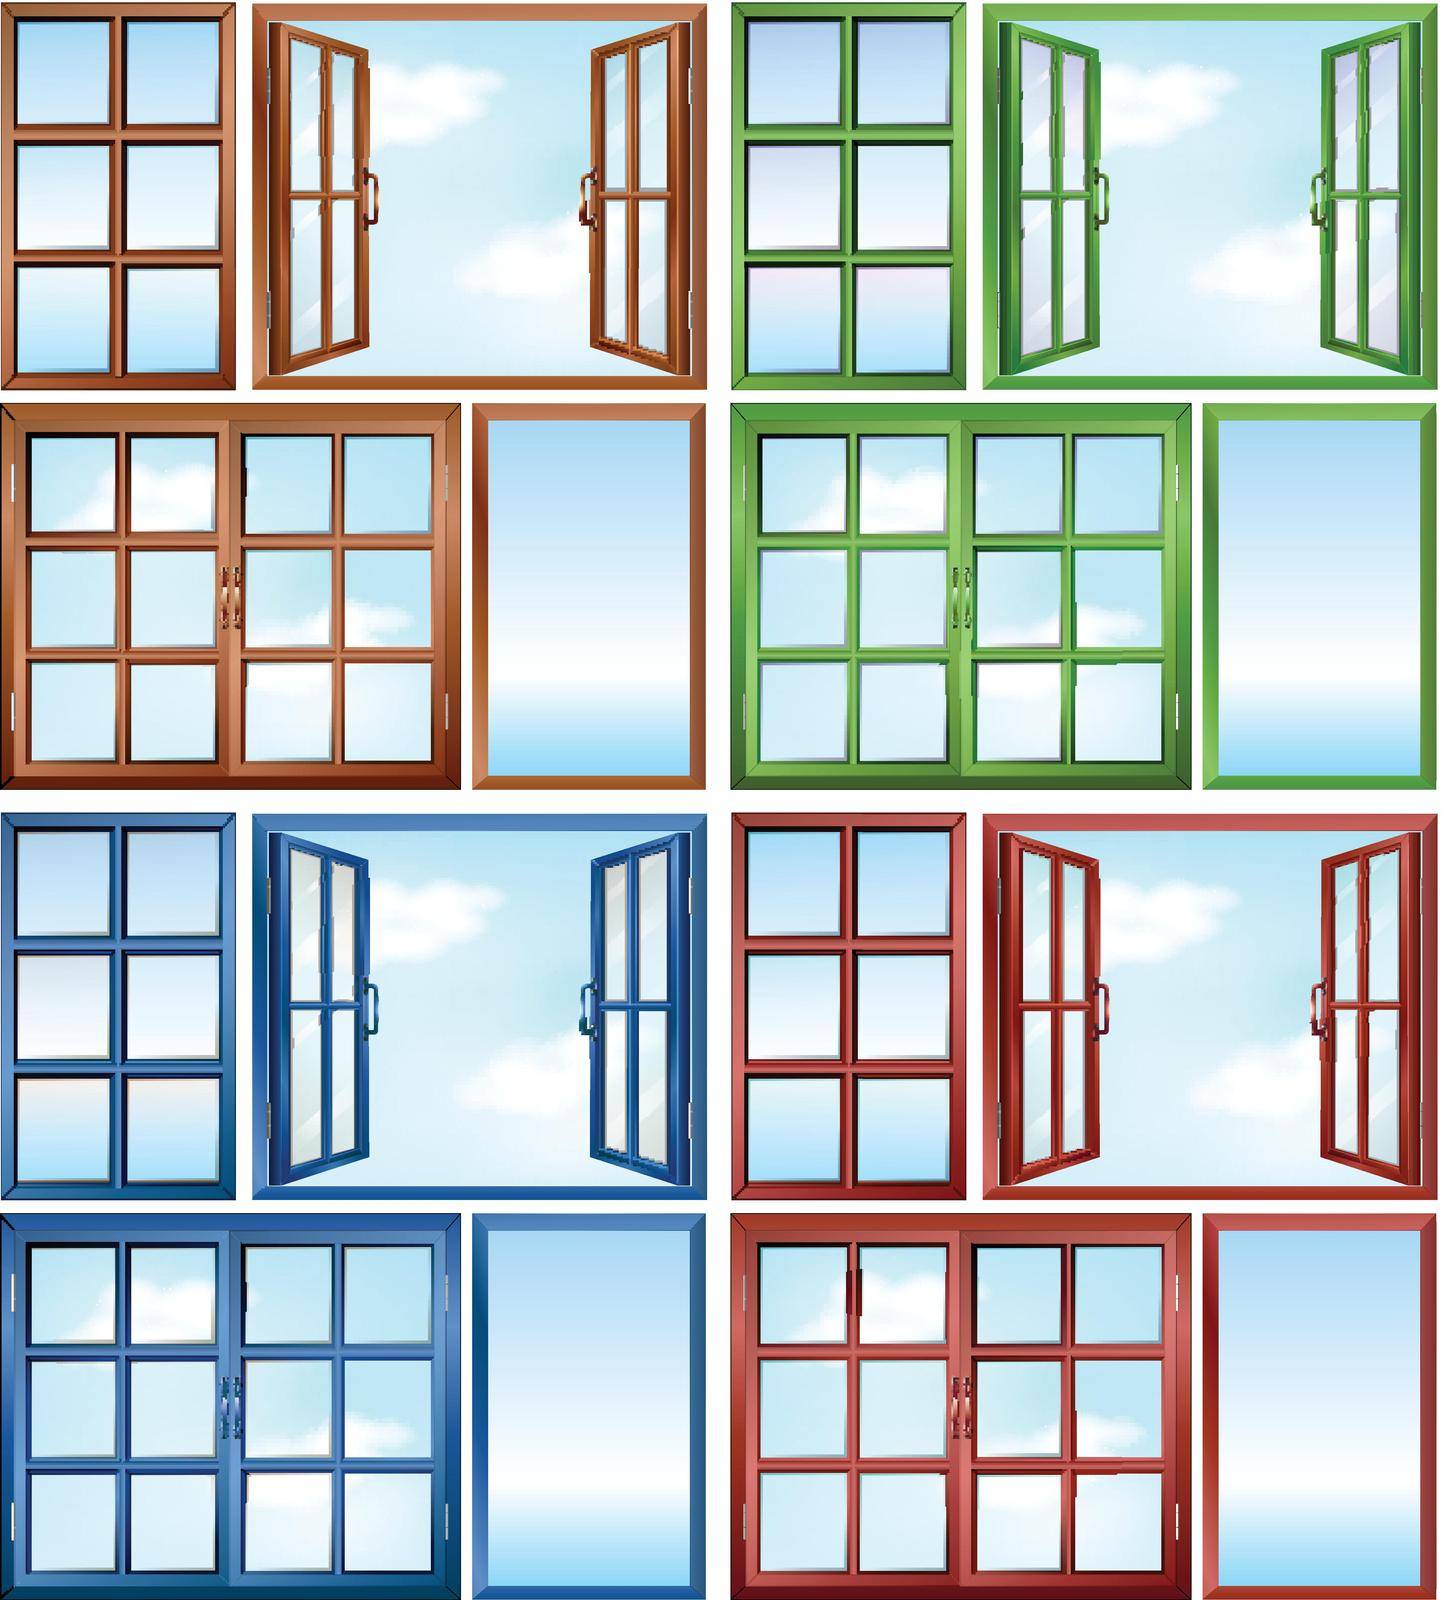 Windows in different colors illustration